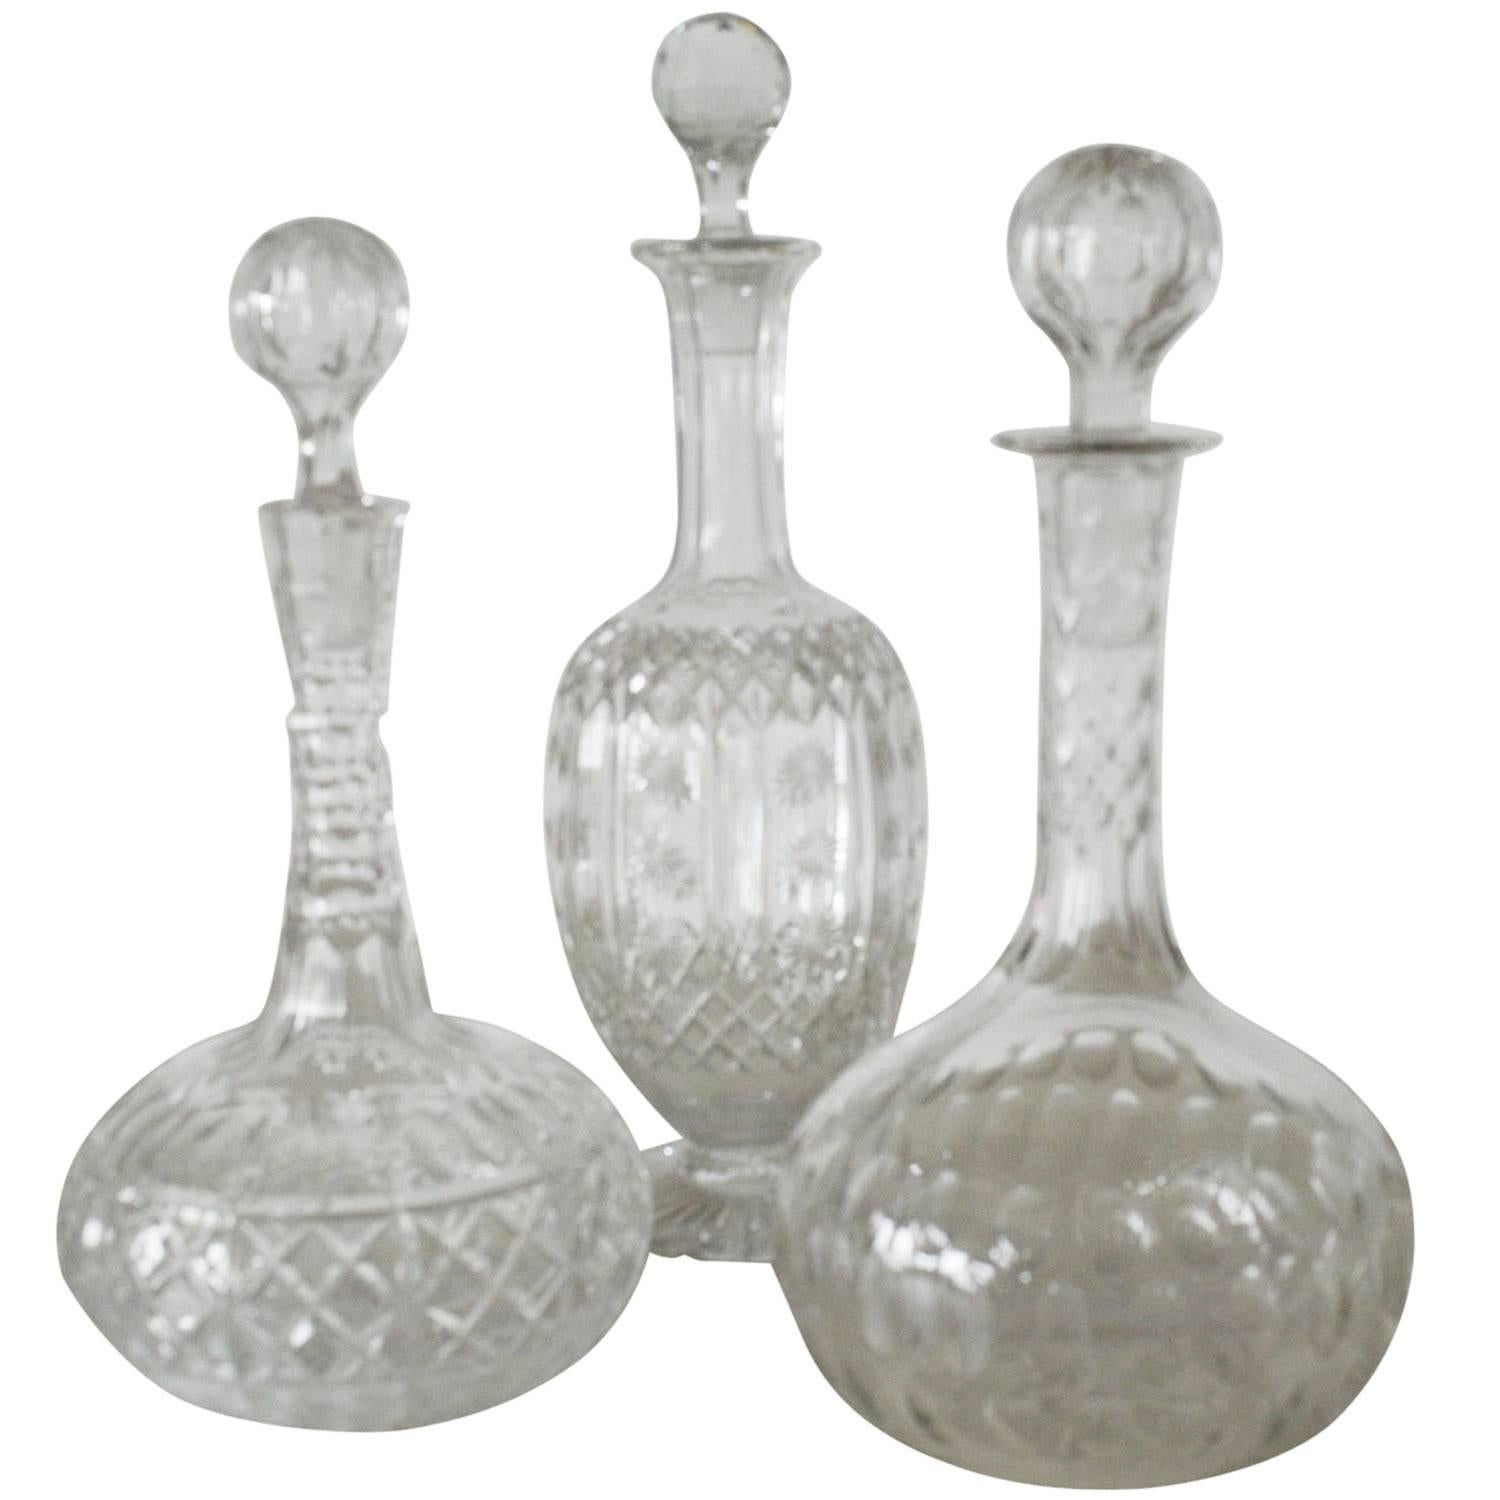 Group of Three Antique Cut Glass or Crystal Decanters, English, circa 1860